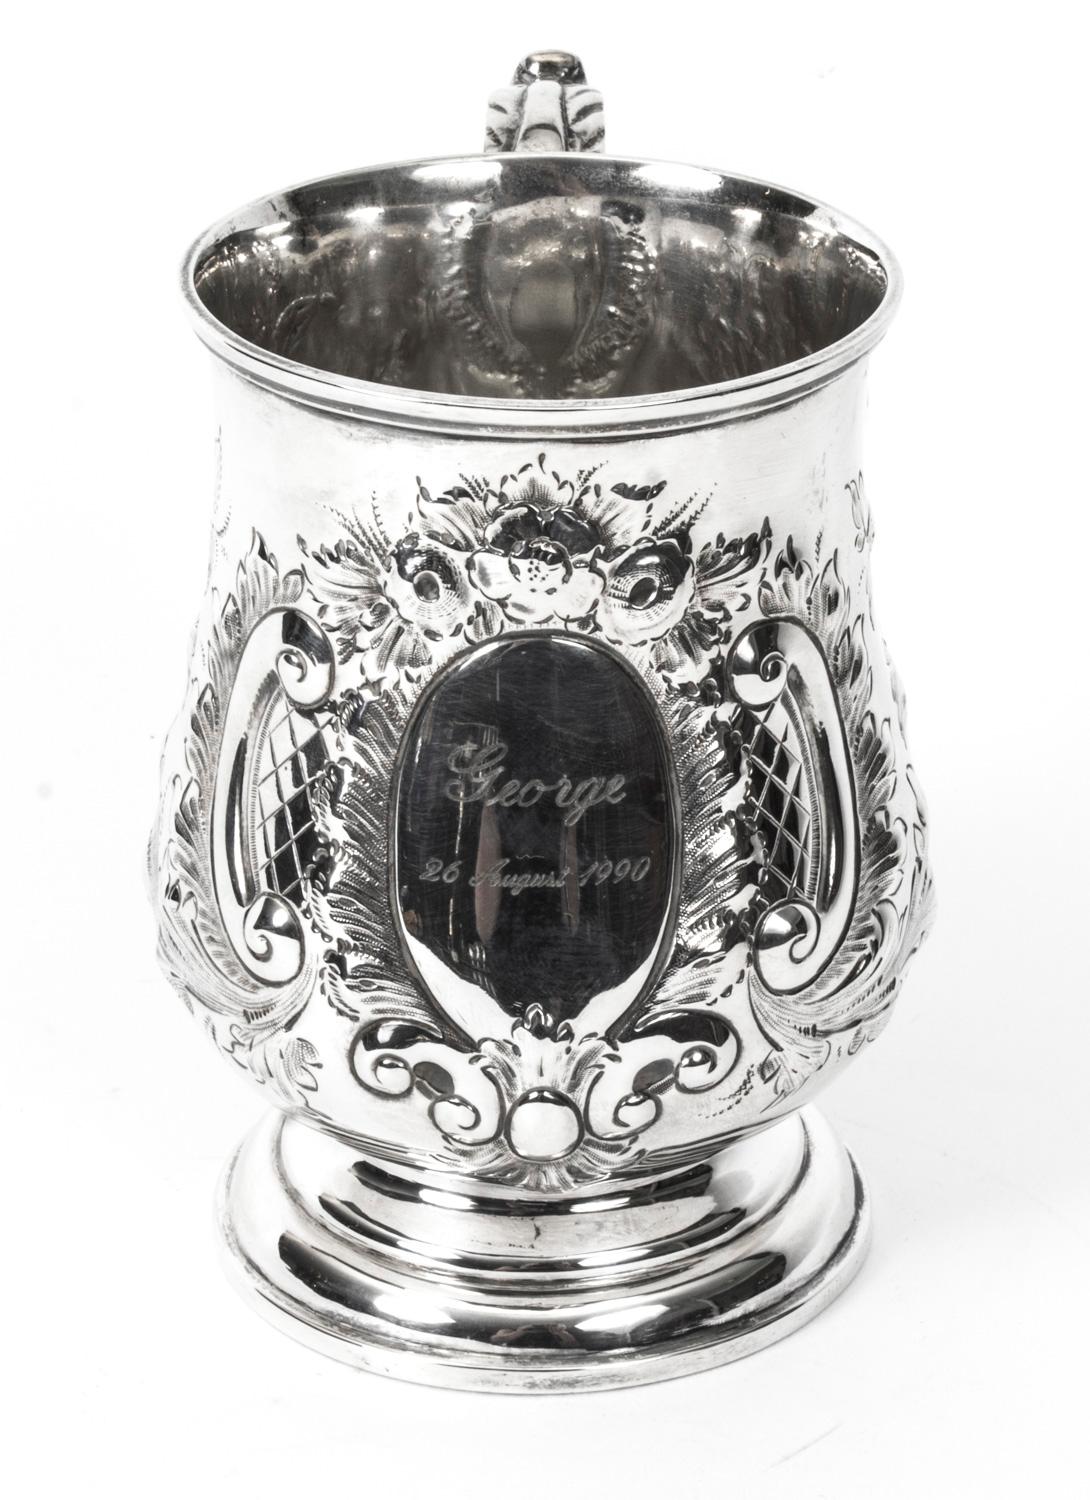 Antique Victorian Silver Plated Embossed and Engraved Mug 19th Century For Sale 1